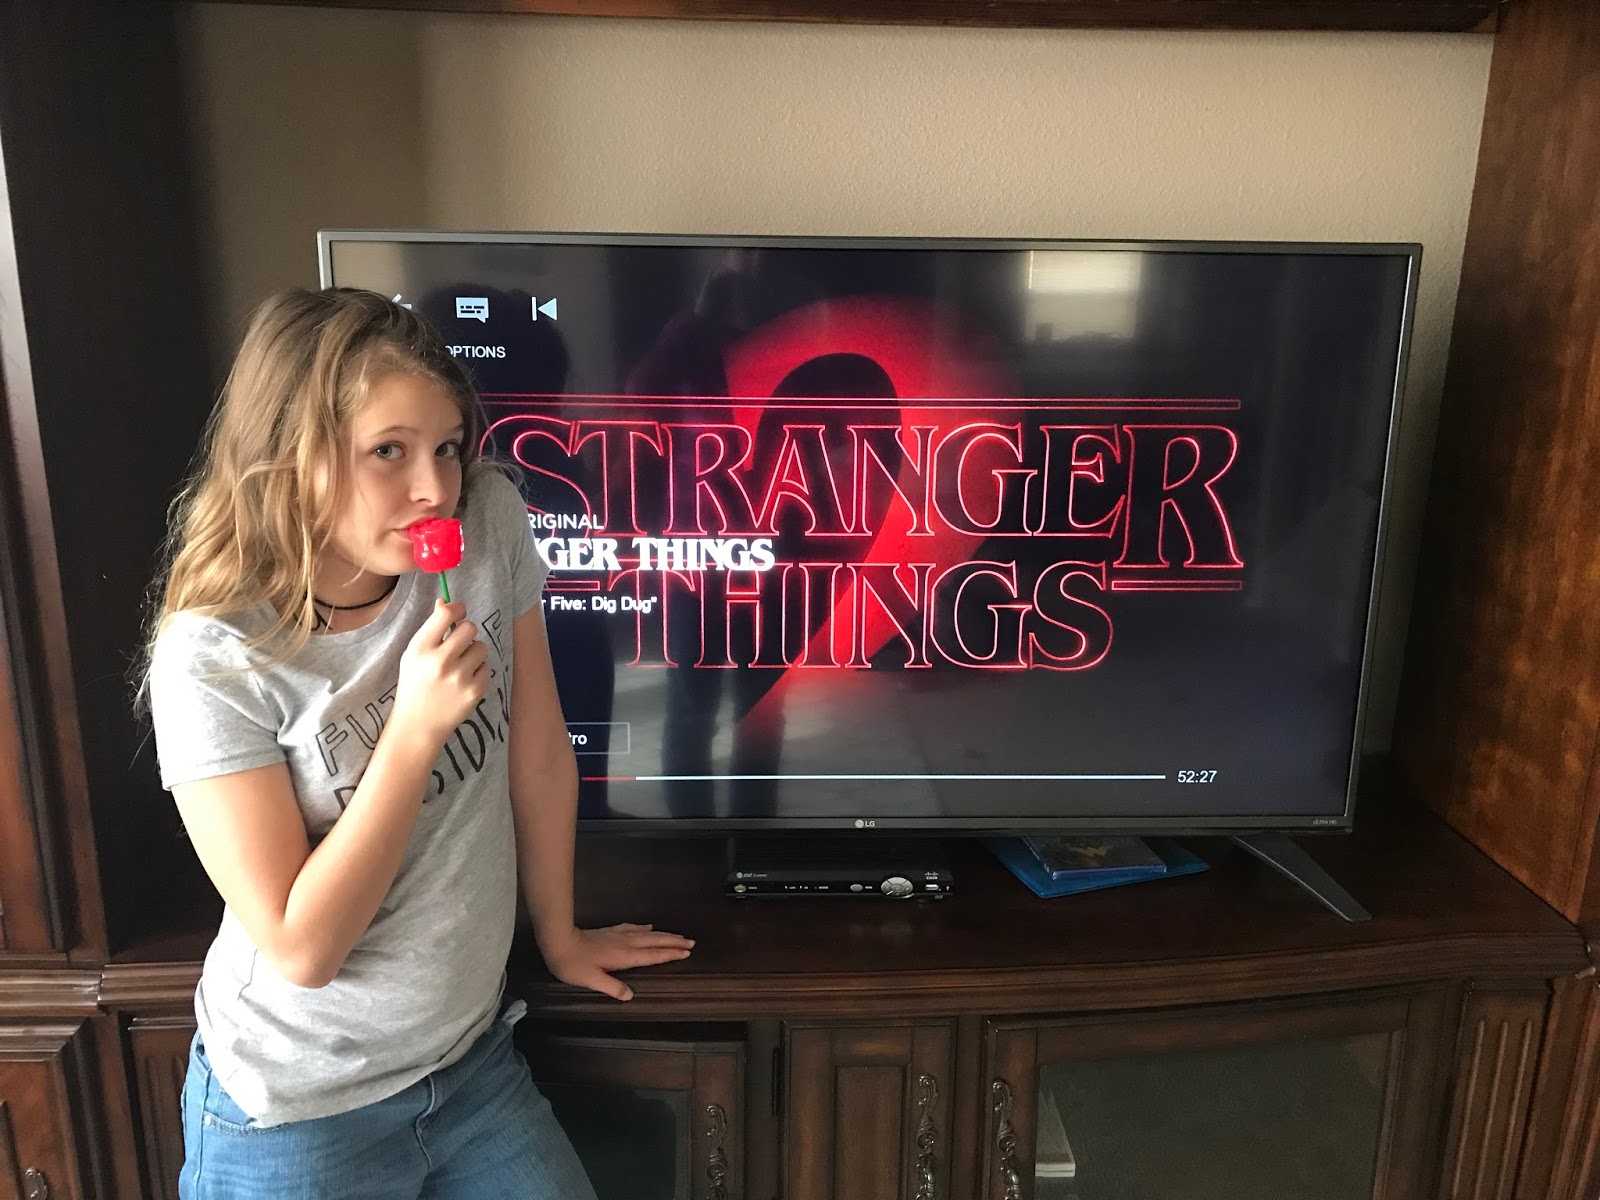 Can 10 year olds watch Stranger things?